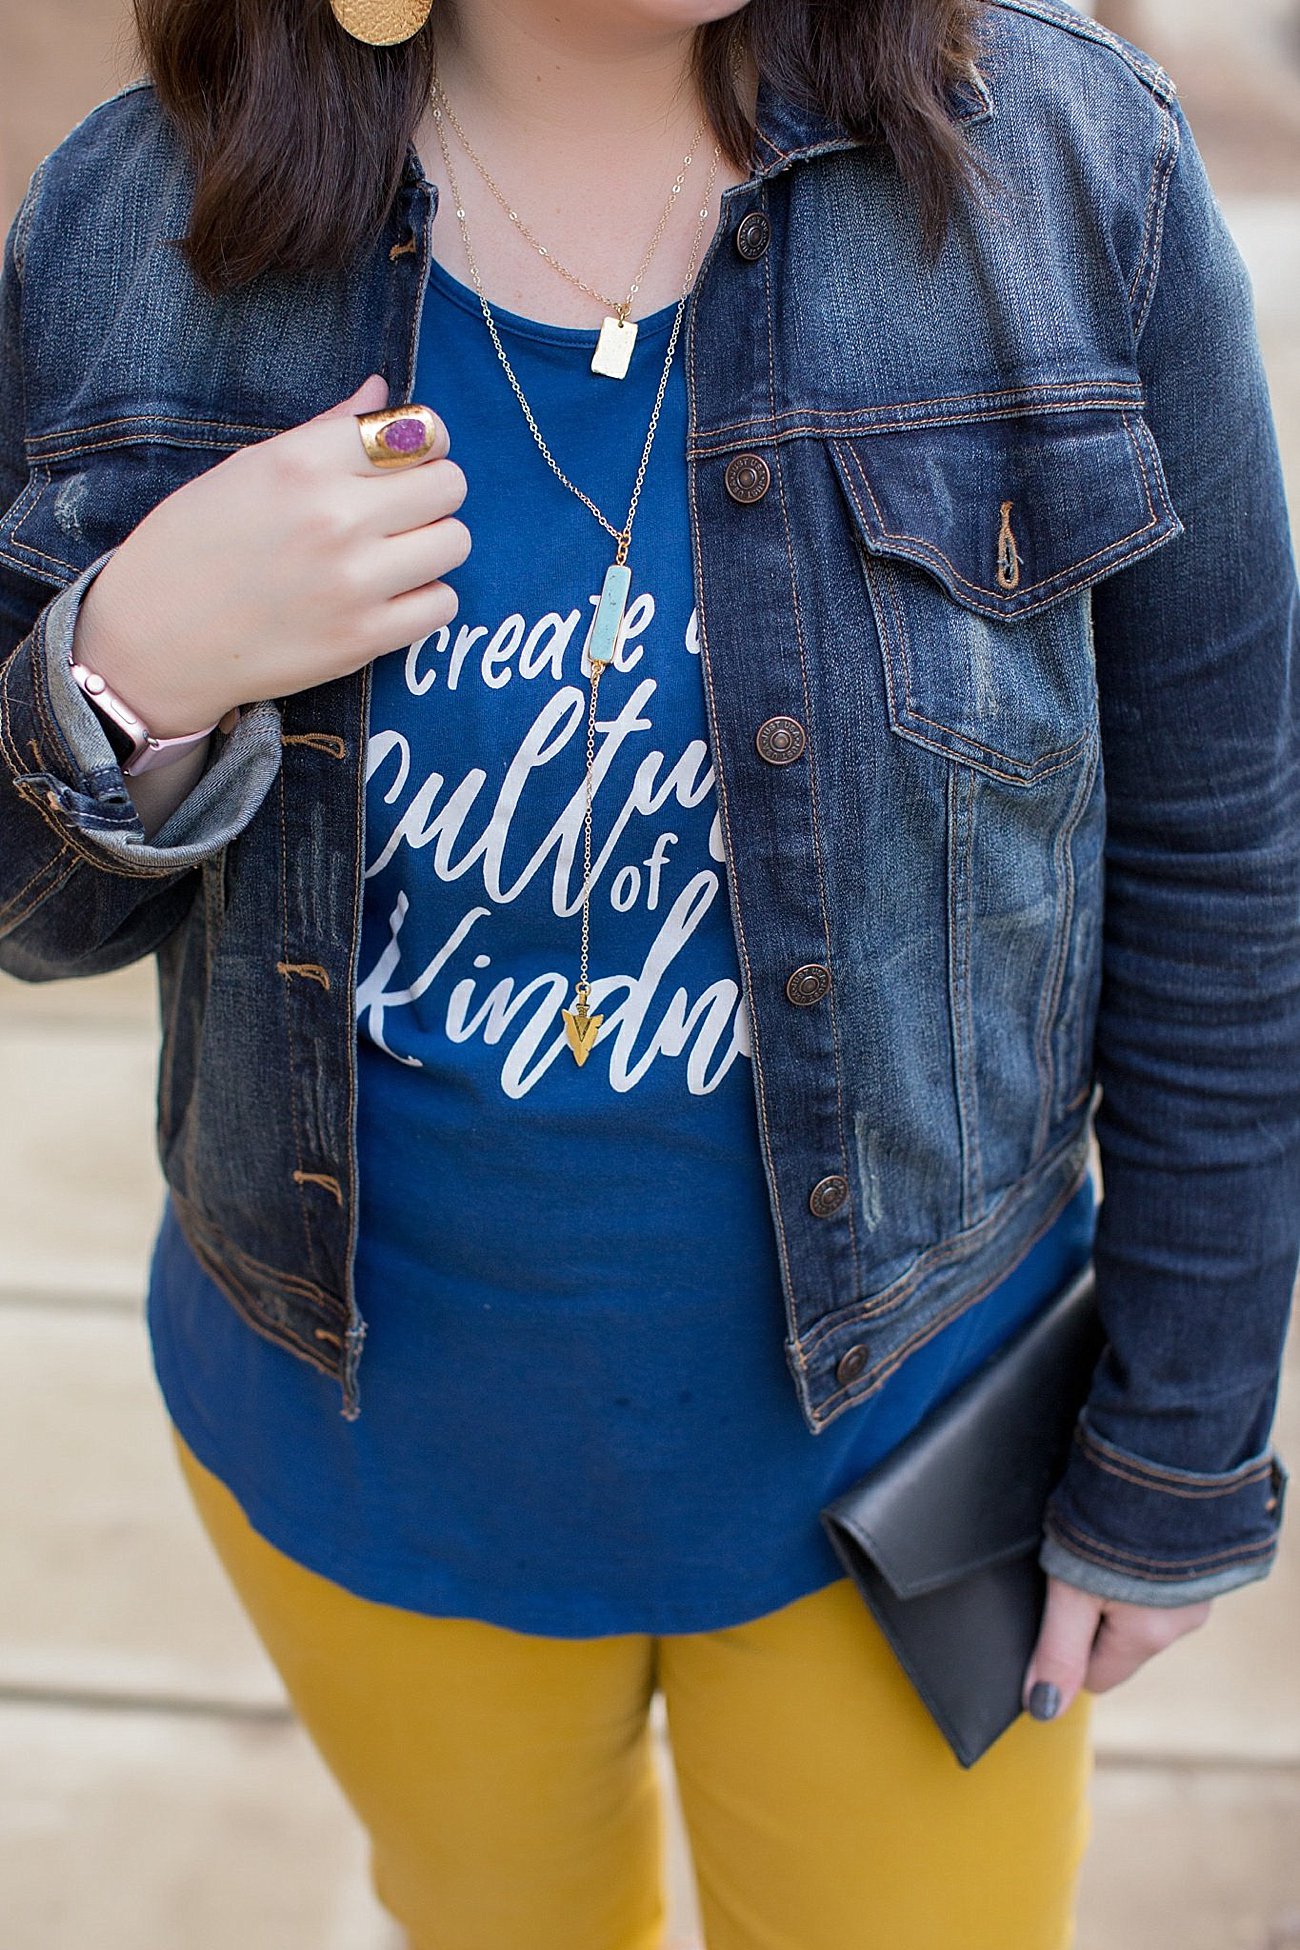 Create a Culture of Kindness, The Root Collective, Emma J. Company jewelry | Ethical Fashion (2)